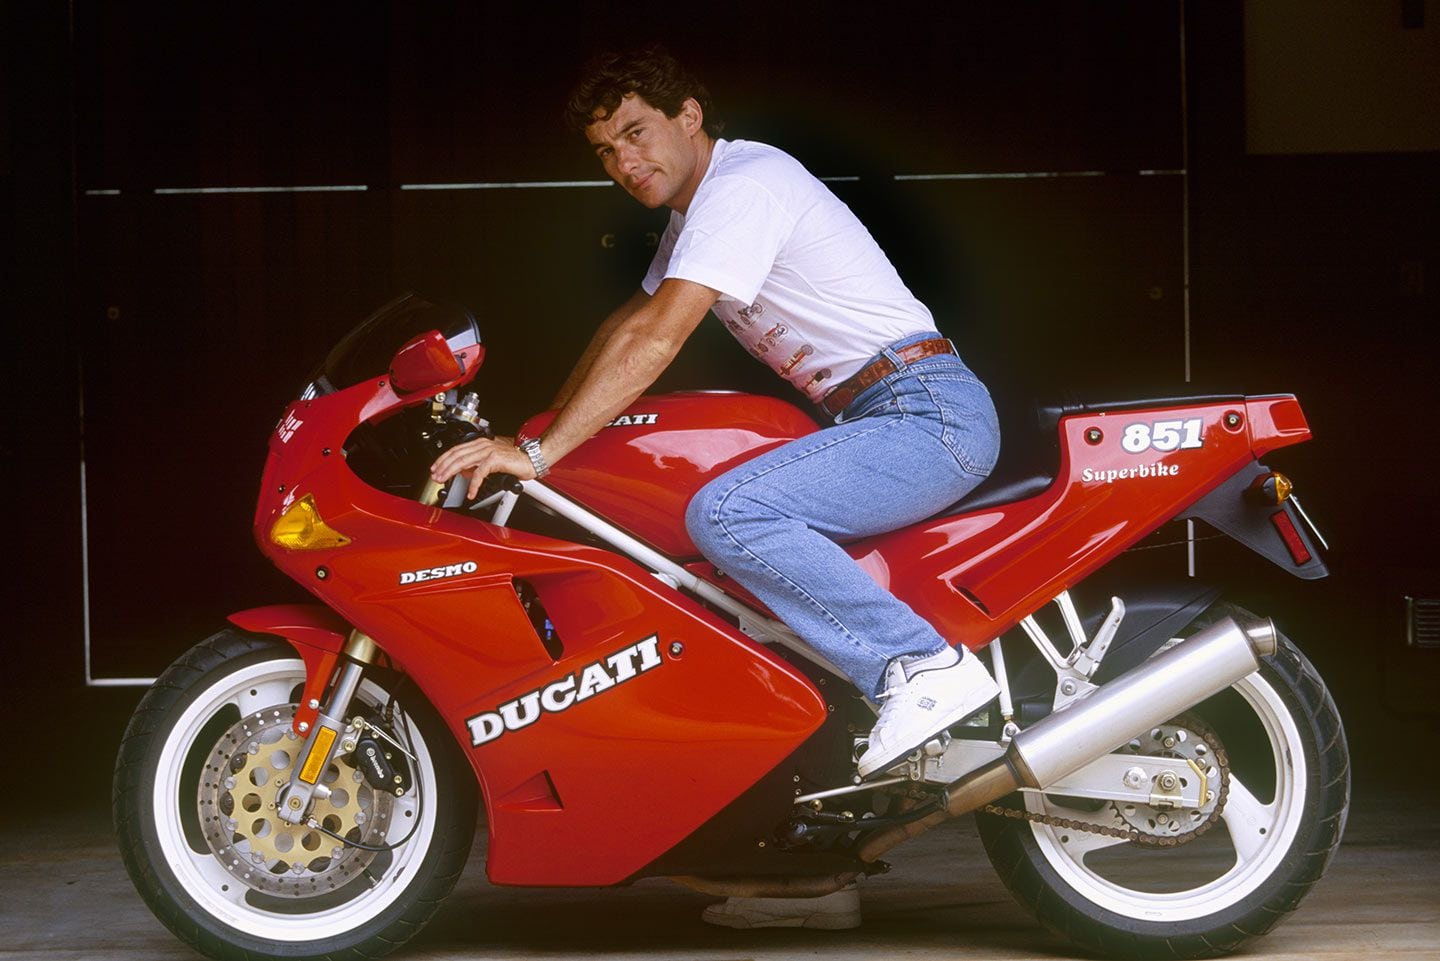 Senna with his 851 SP.